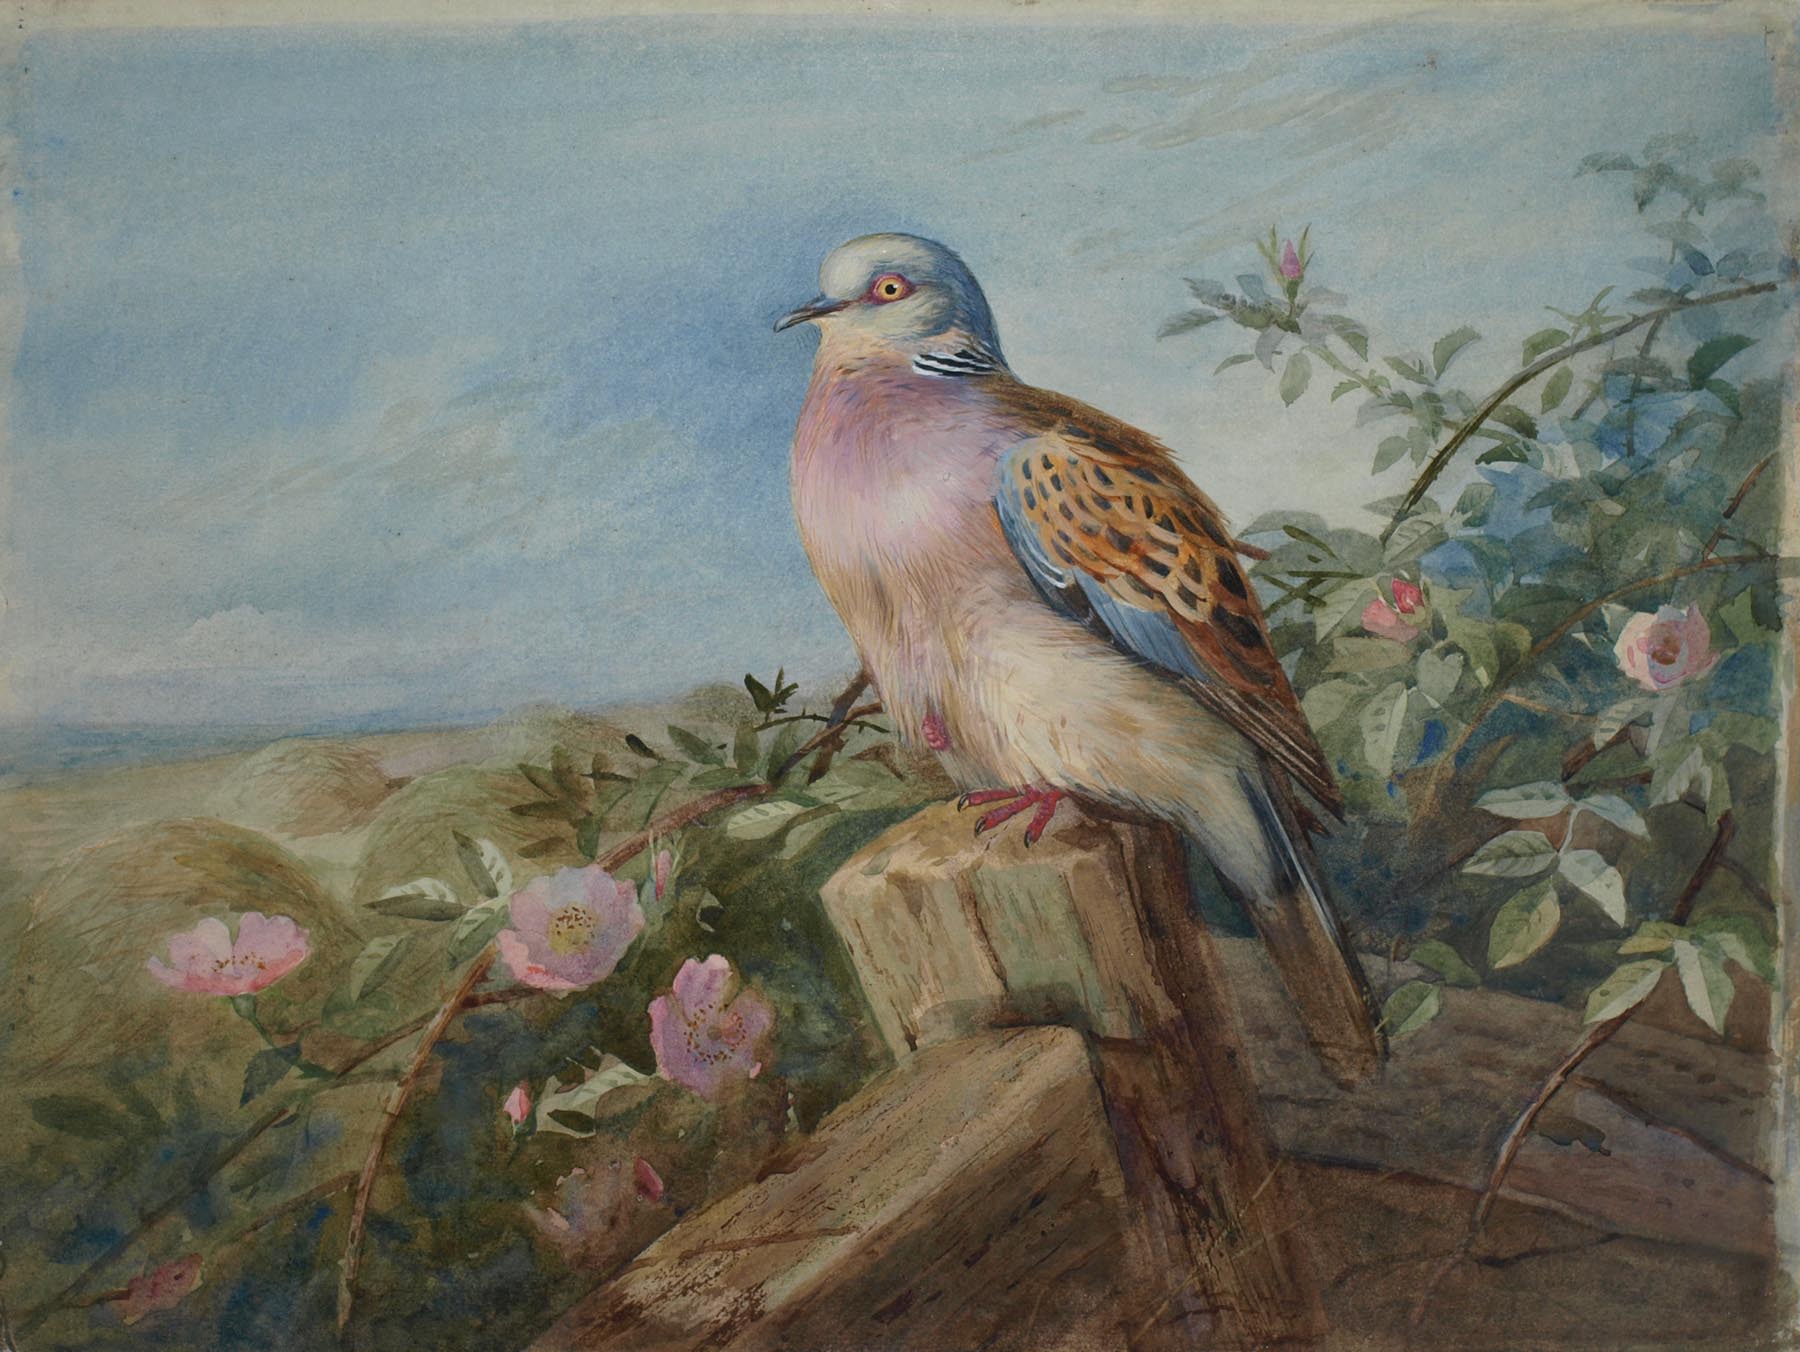 Turtle Dove and Dog Roses, undated